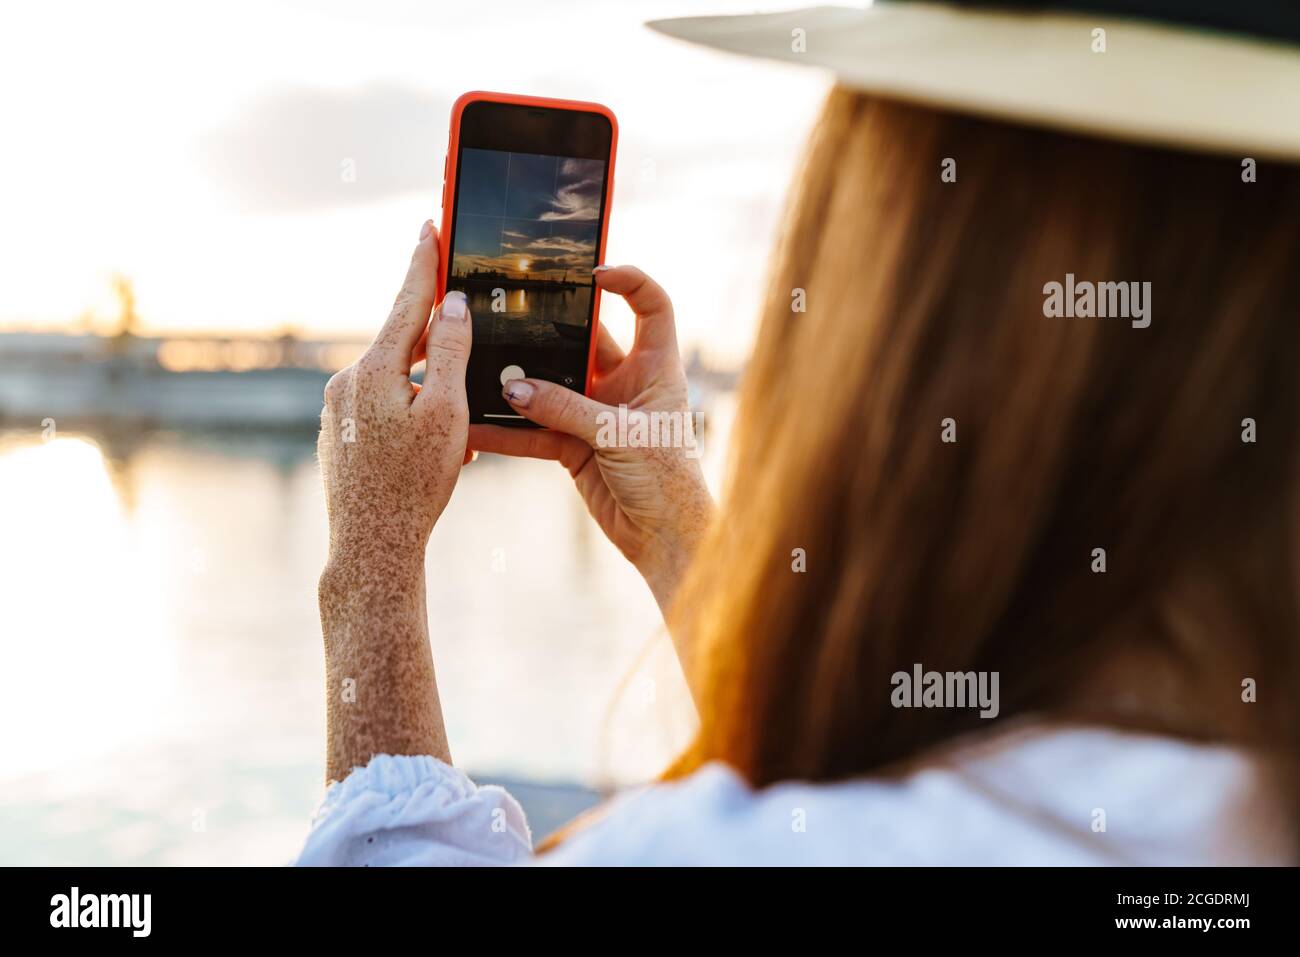 Image of young ginger woman taking photo of sunset on mobile phone at promenade Stock Photo